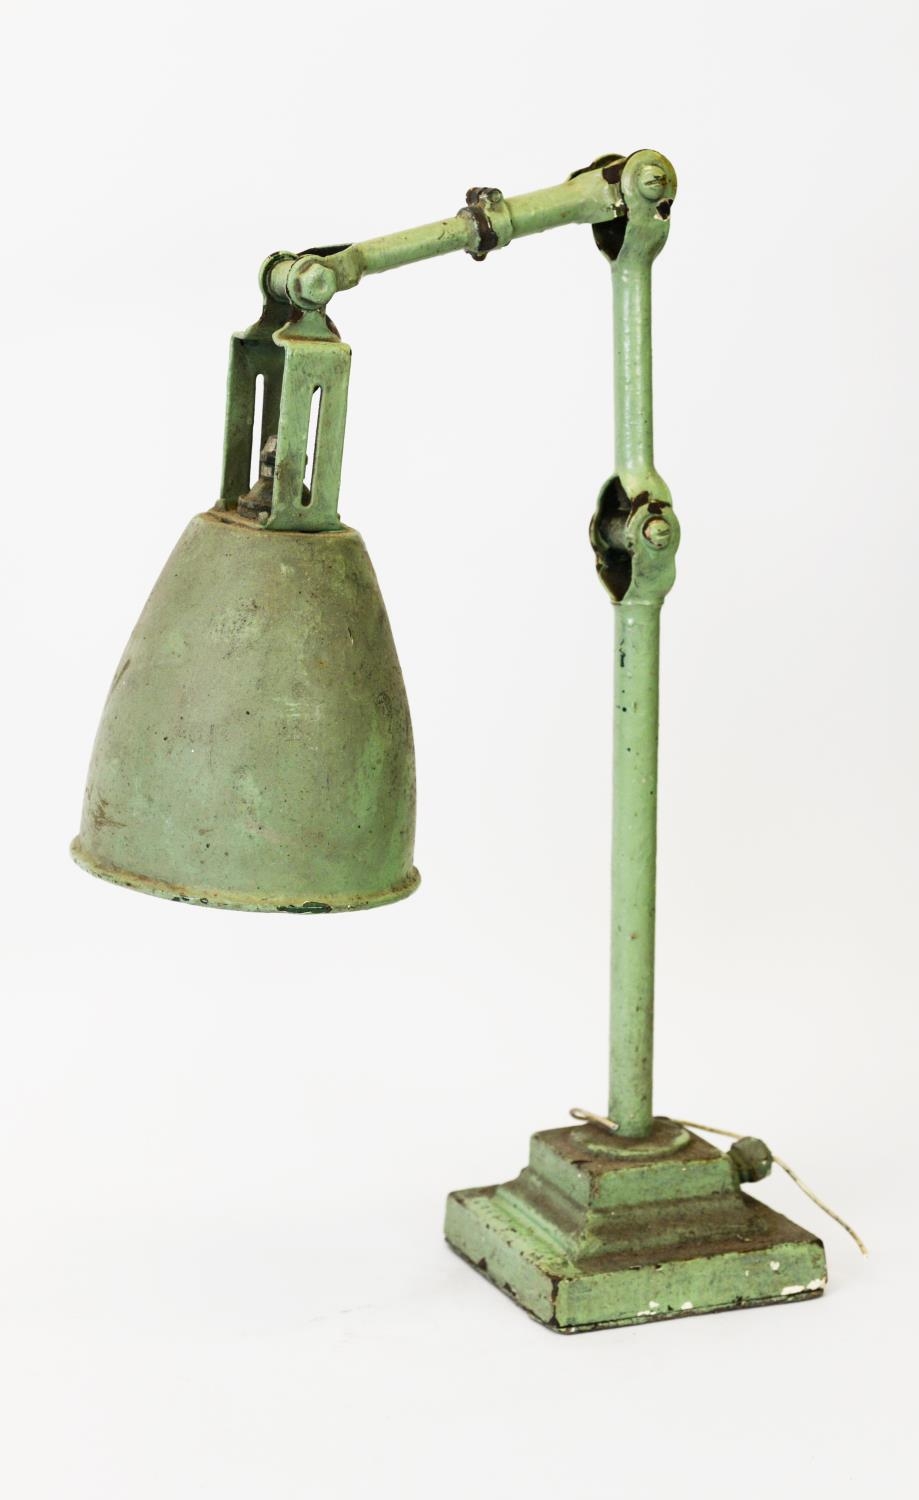 DUGDILLS, CIRCA 1930s PATENT PAINTED METAL ANGLEPOISE DESK LAMP, all original but later painted